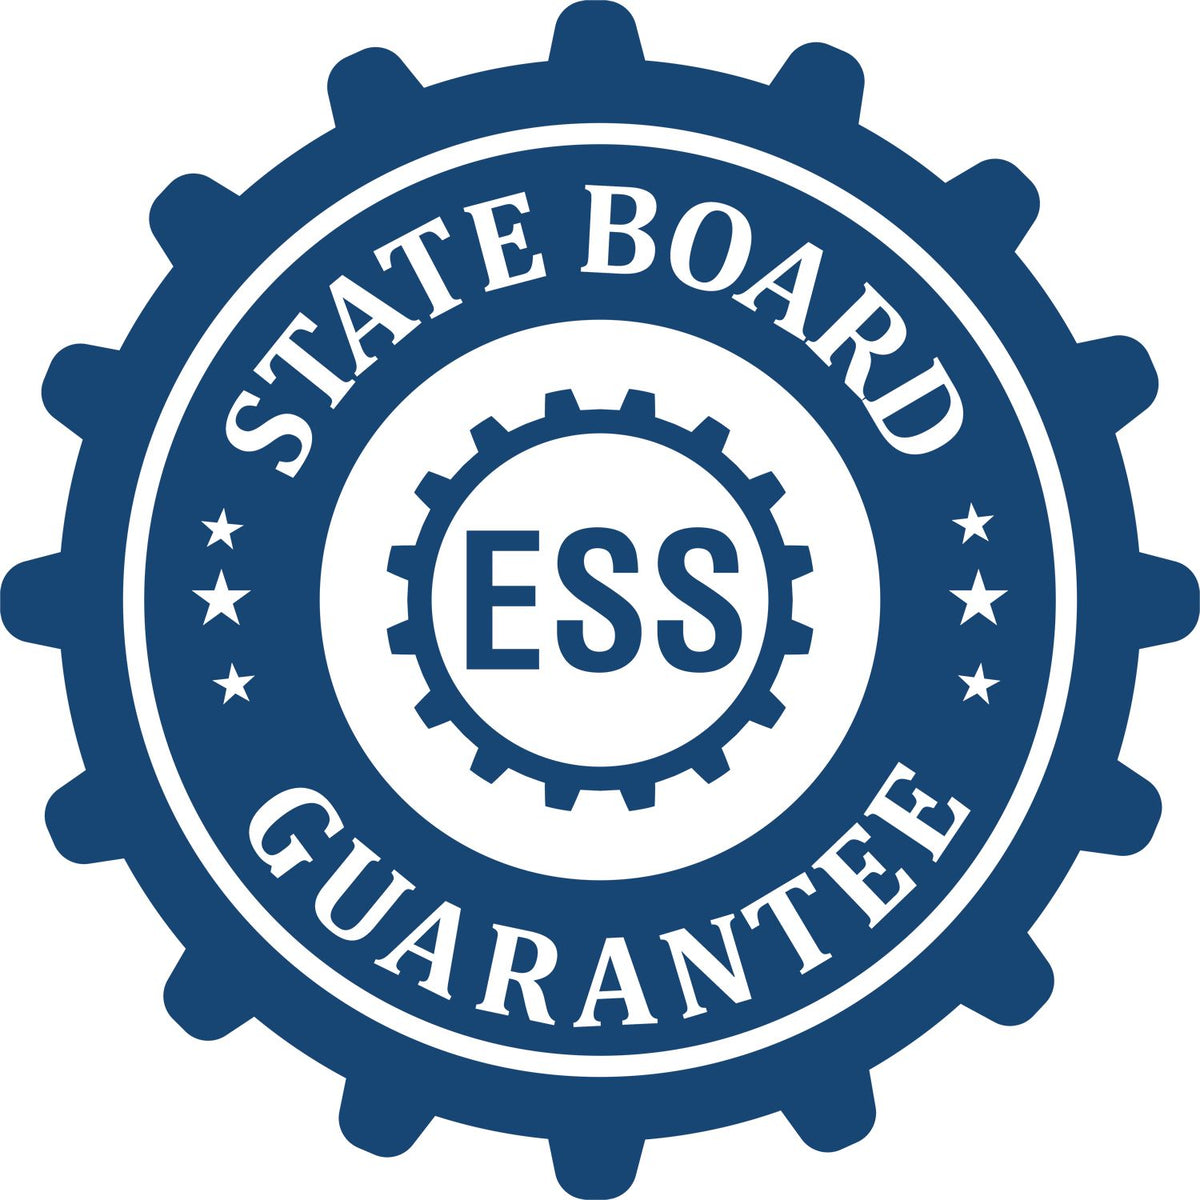 An emblem in a gear shape illustrating a state board guarantee for the State of South Carolina Extended Long Reach Engineer Seal product.